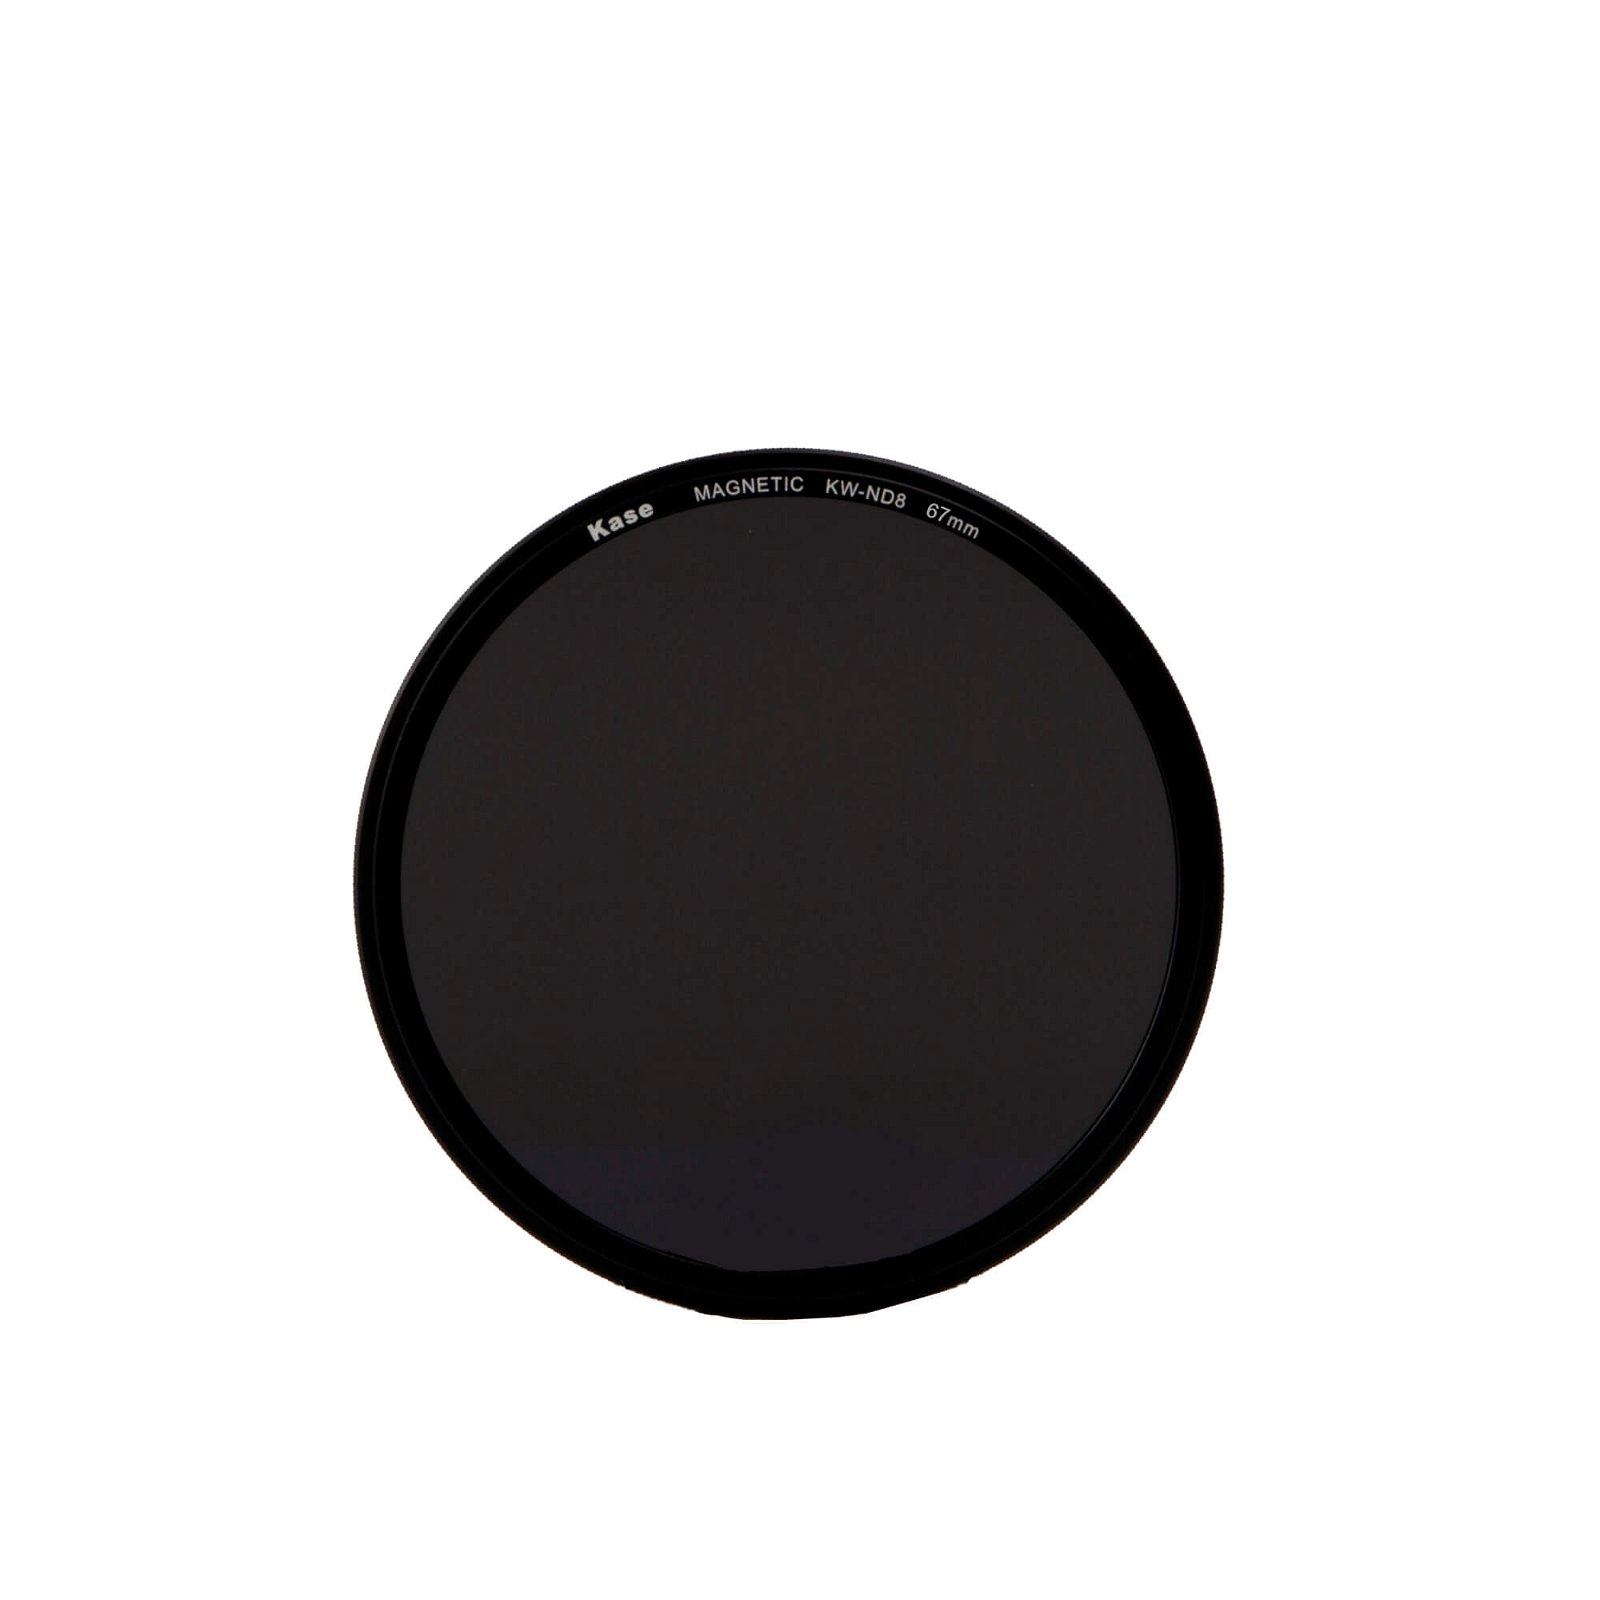 ROUND Wolverine Magnetic Professional ND Filter Set